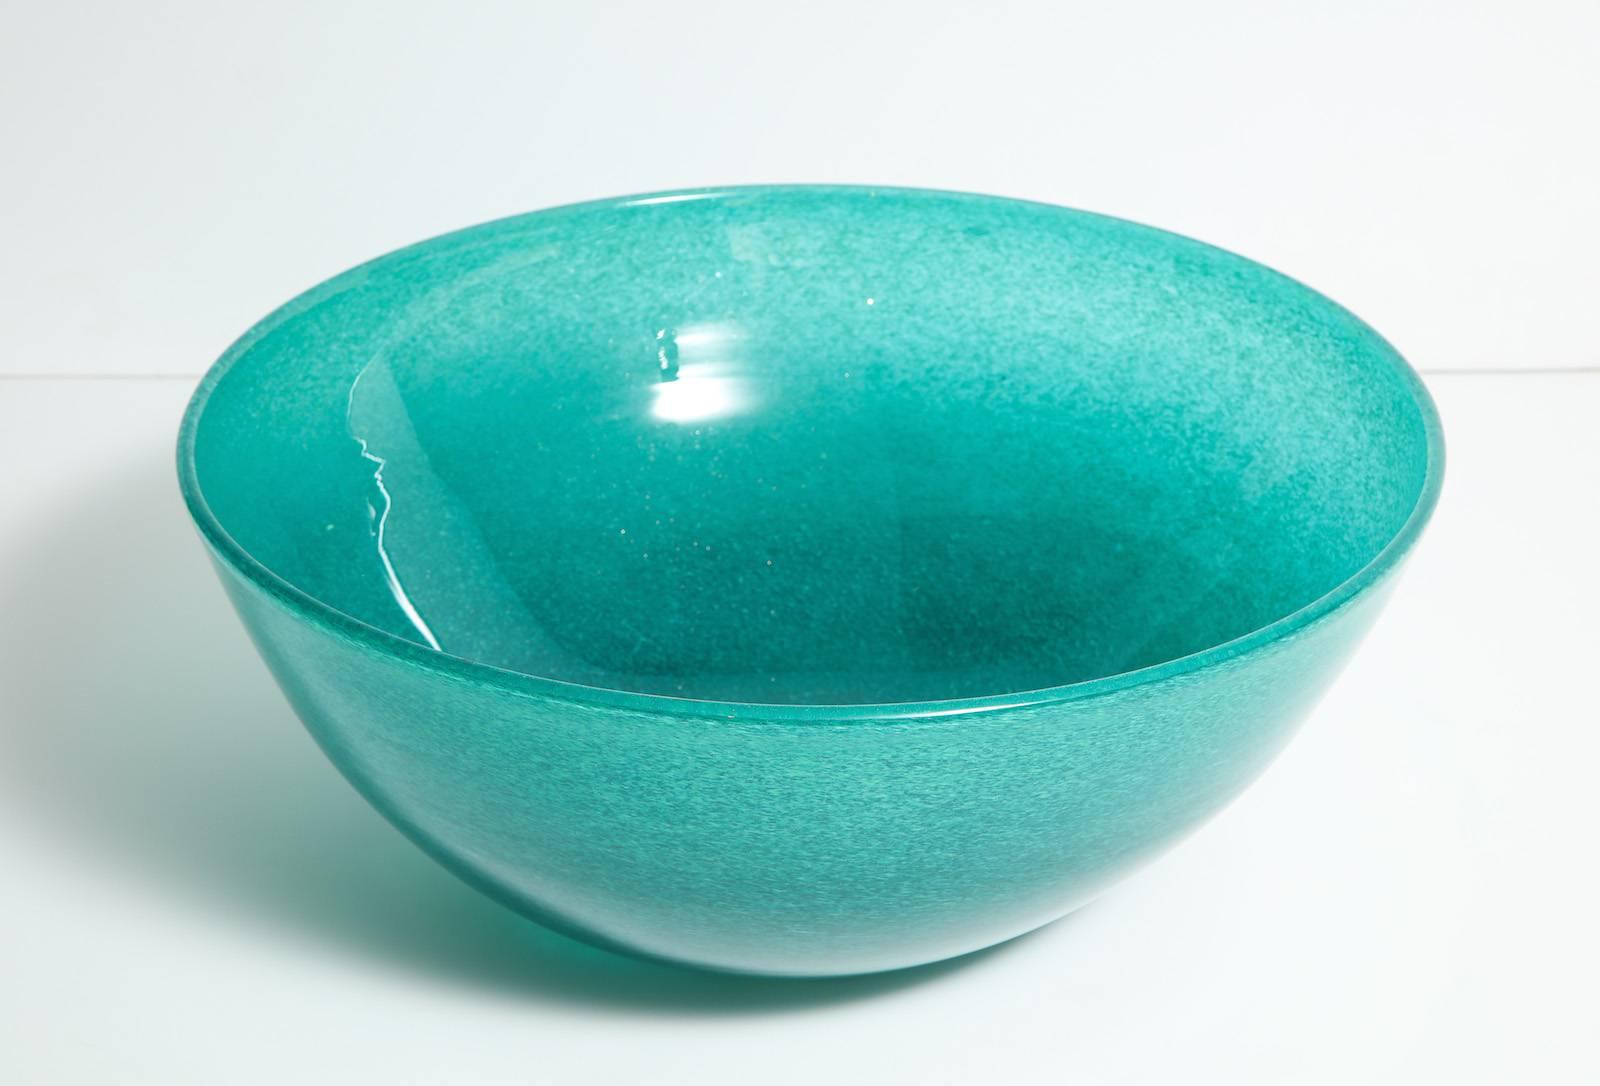 Large-scale Eugenio bowl by Ercole Barovier. Beautiful and large glass bowl of aqua-marine and clear glass with reflective flecks and internal bubbles.